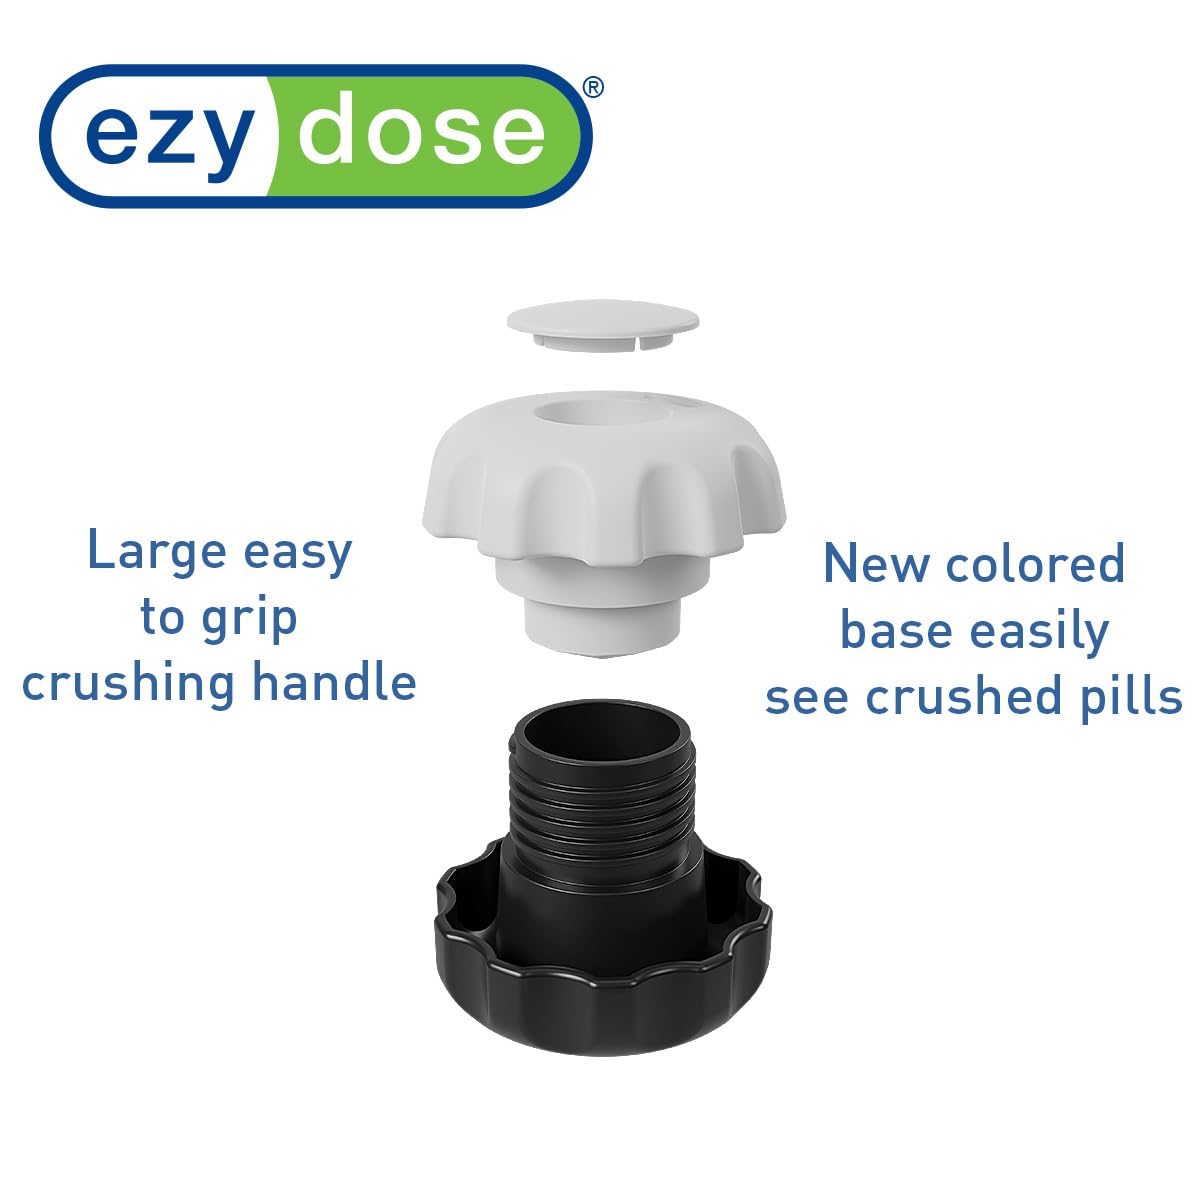 EZY DOSE Crush Pill, Vitamins, Tablets Crusher and Grinder, Effortlessly Crushes Medications into Fine Powder, Features Storage Compartment, Durable, Easy-to-Use Design, Black, Large